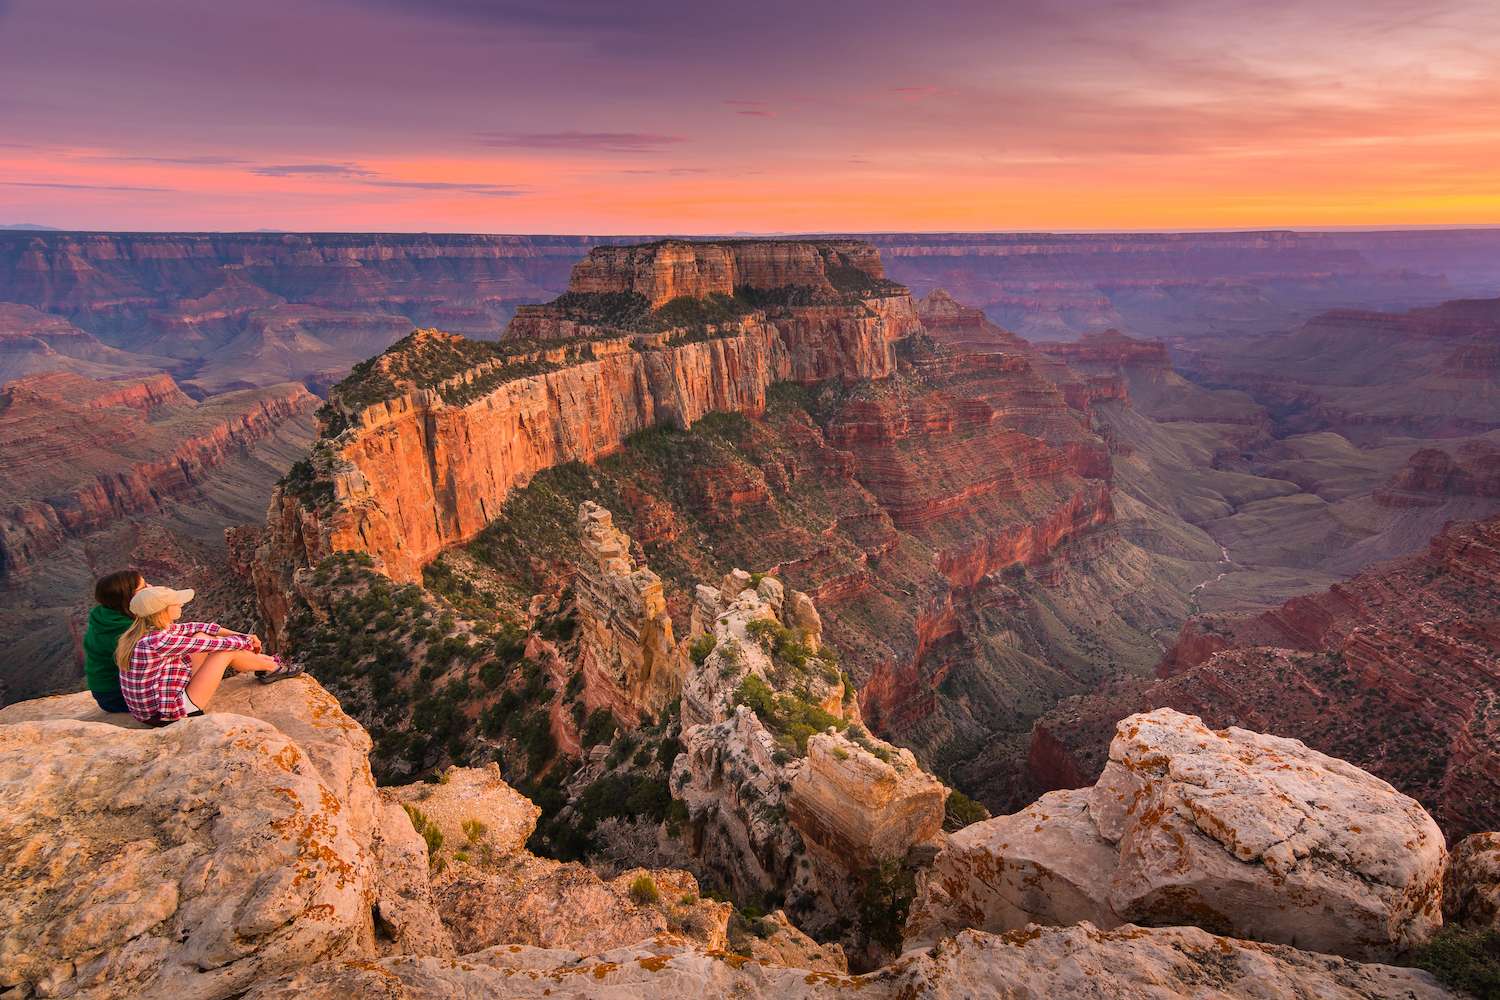 Two people sitting near the edge watching sunset at Grand Canyon National Park North Rim, USA. Grand Canyon National Park is one of the world's natural wonders.